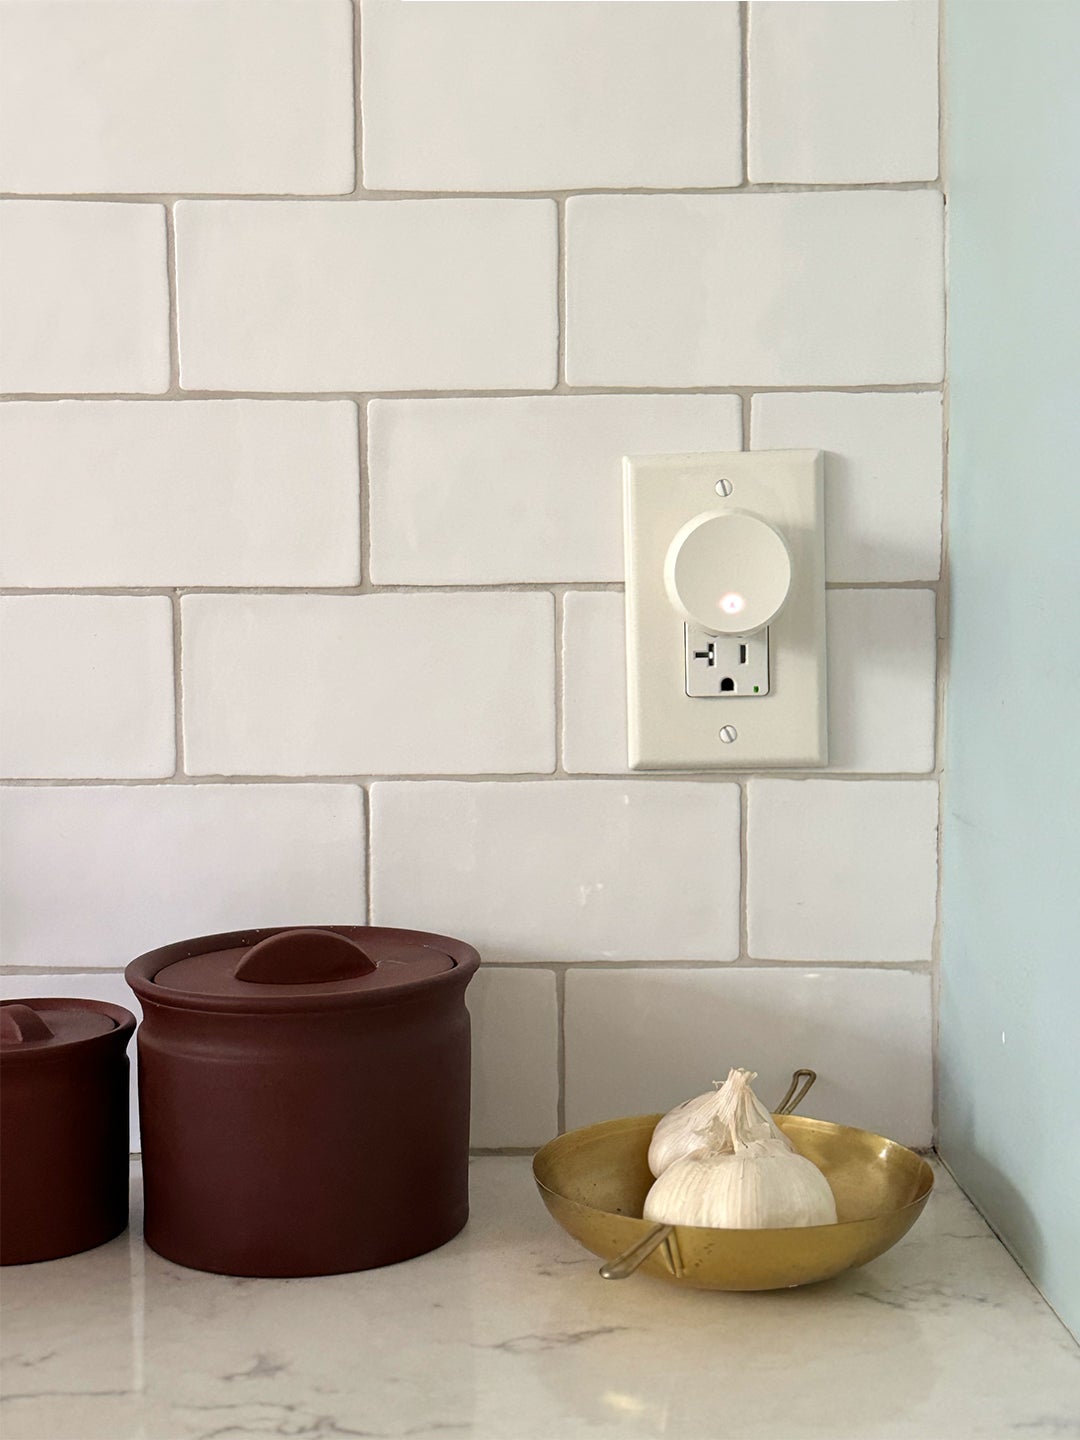 level connect device in kitchen